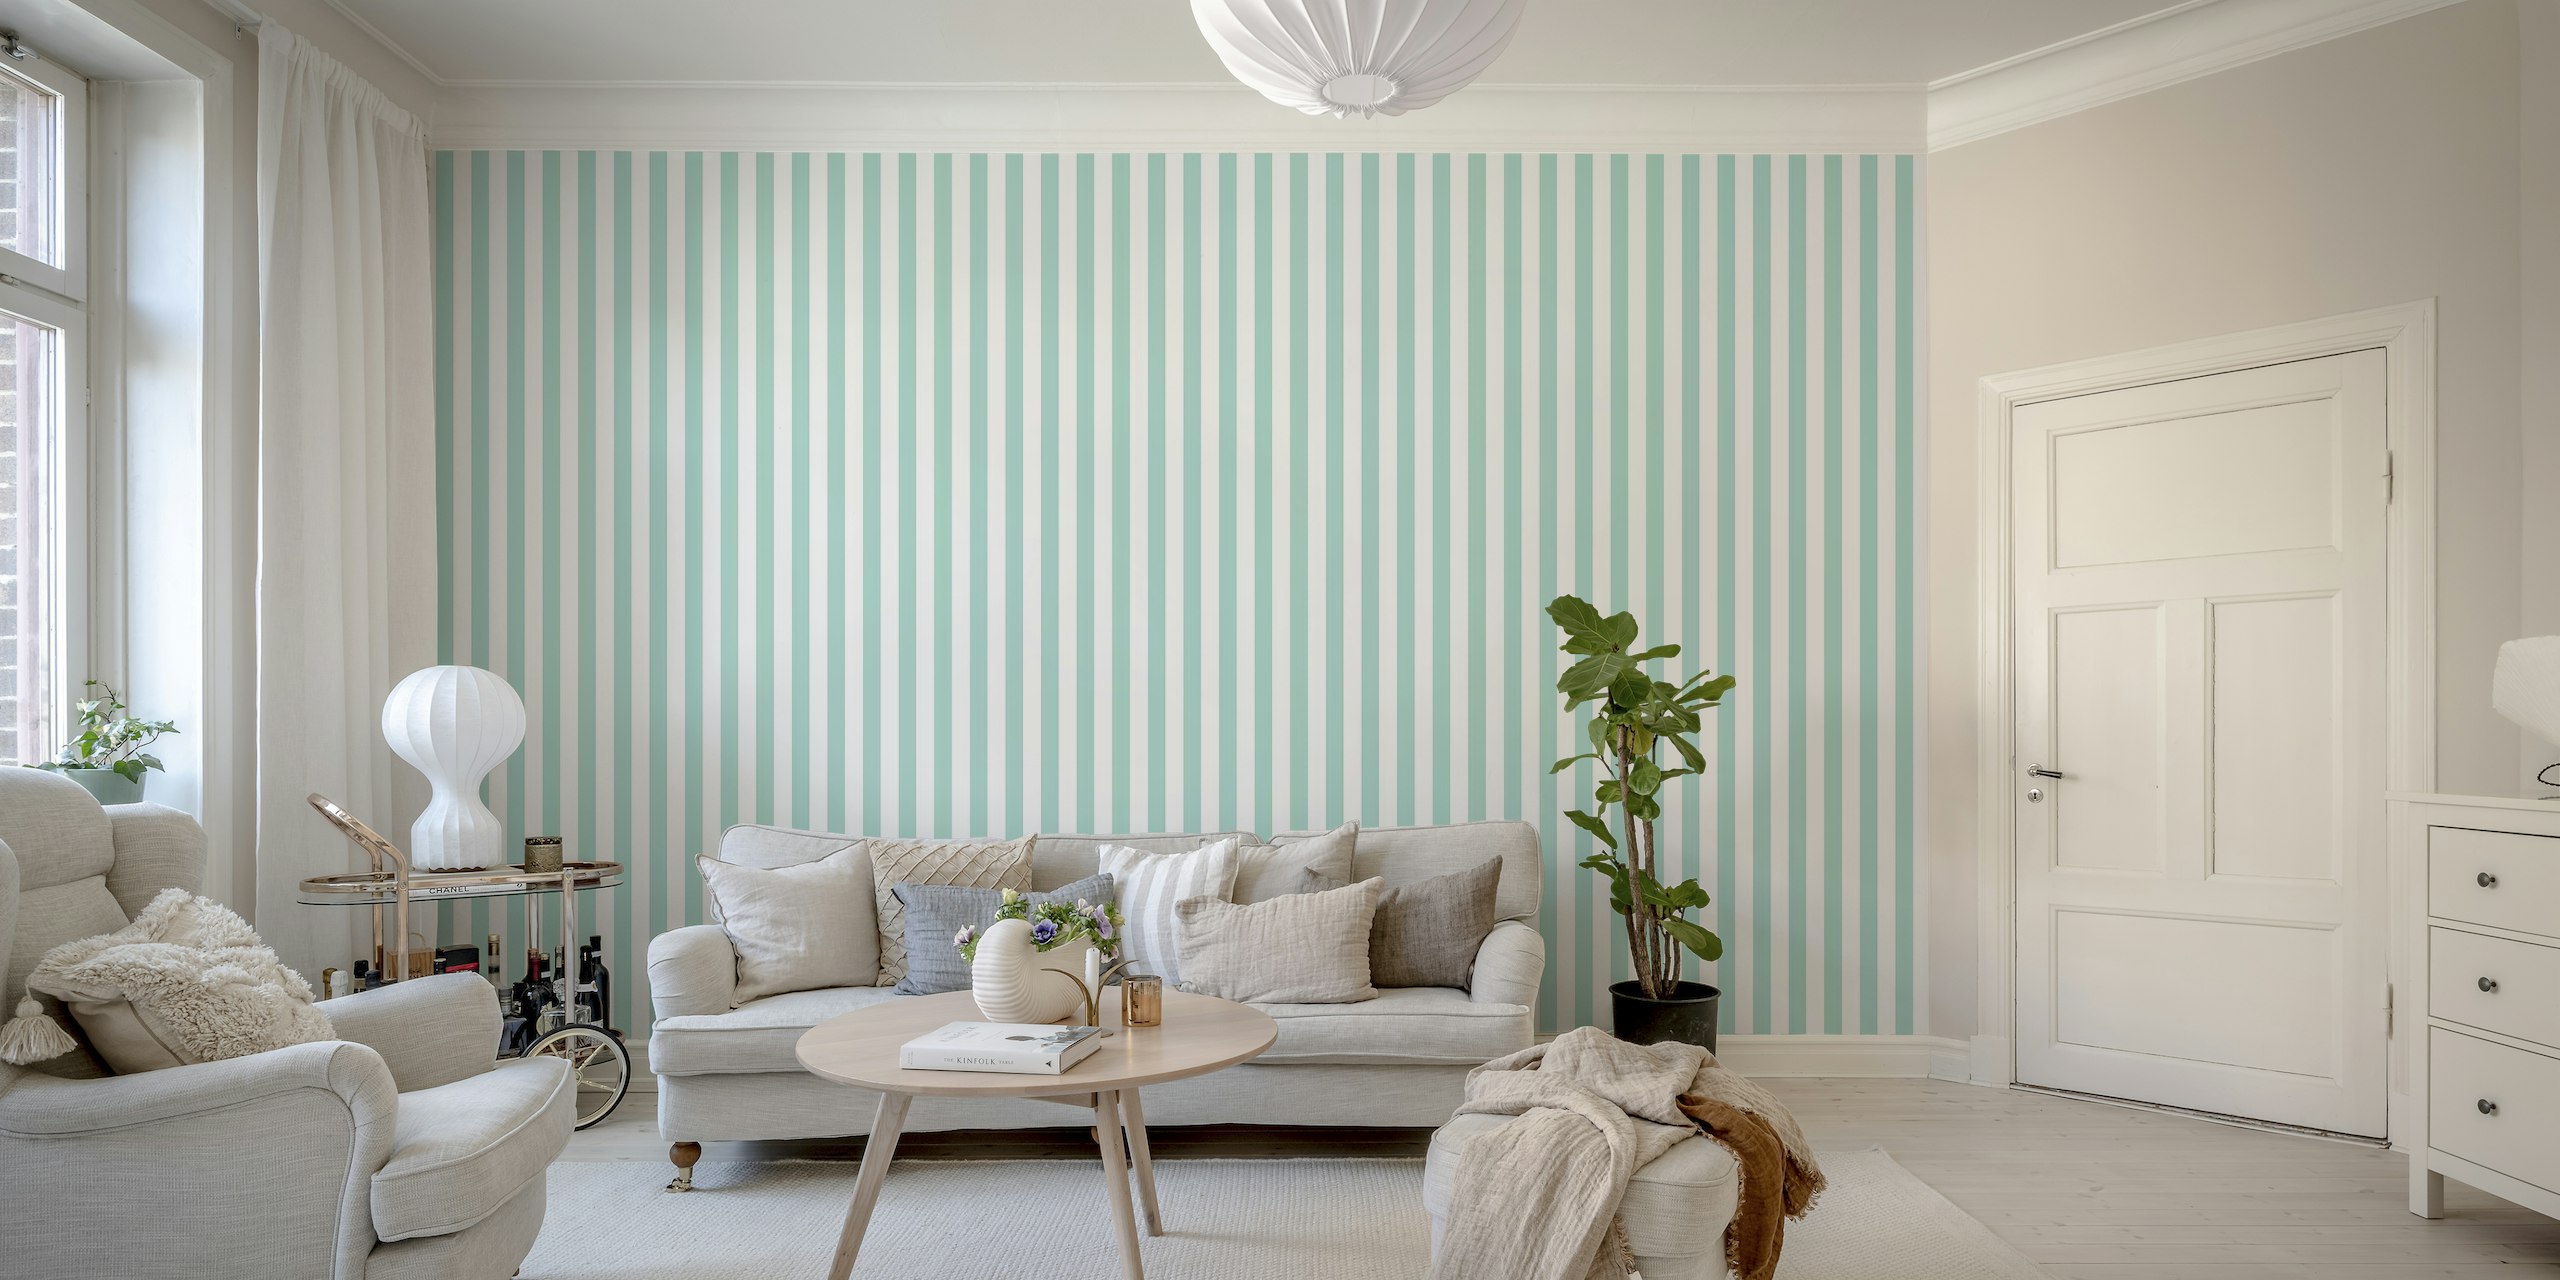 Mint and white stripes behang